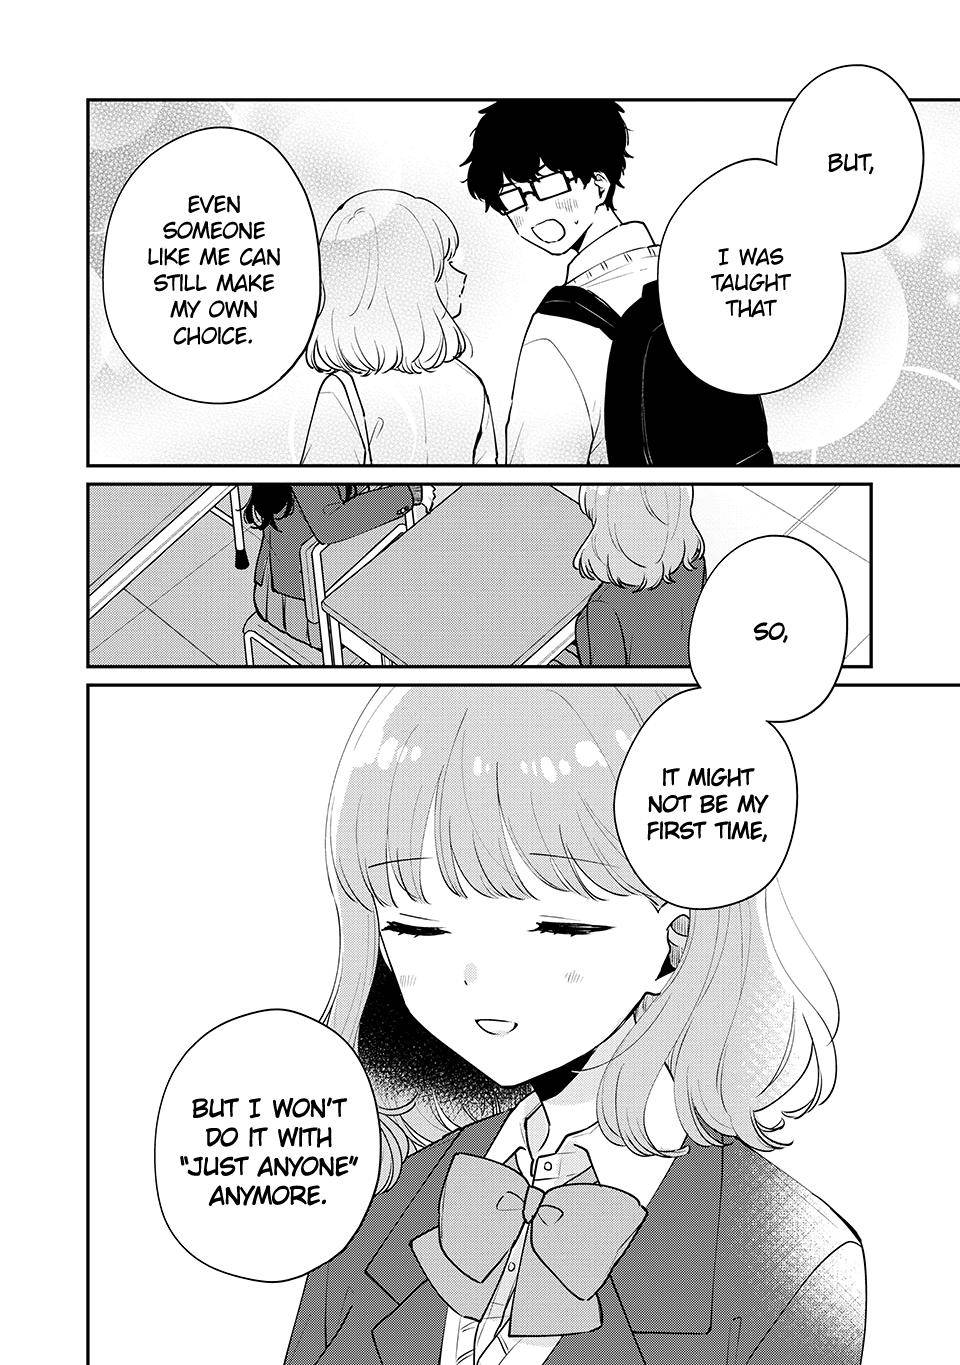 It's Not Meguro-san's First Time chapter 52 page 9